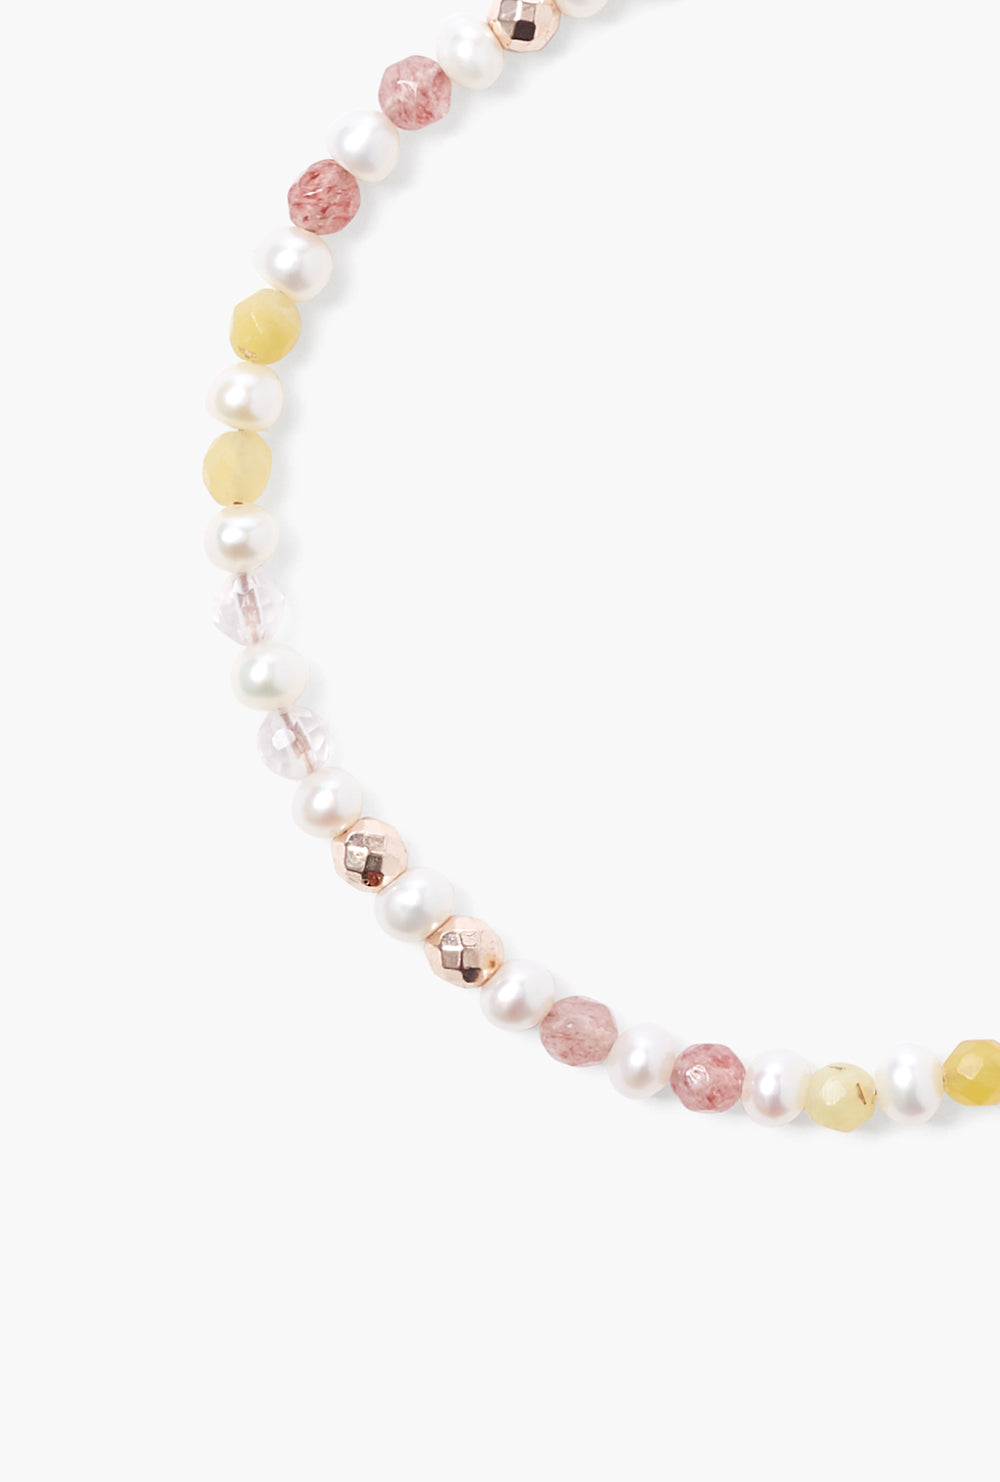 PEARL BEADS ADJUSTABLE ANKLET - Kingfisher Road - Online Boutique